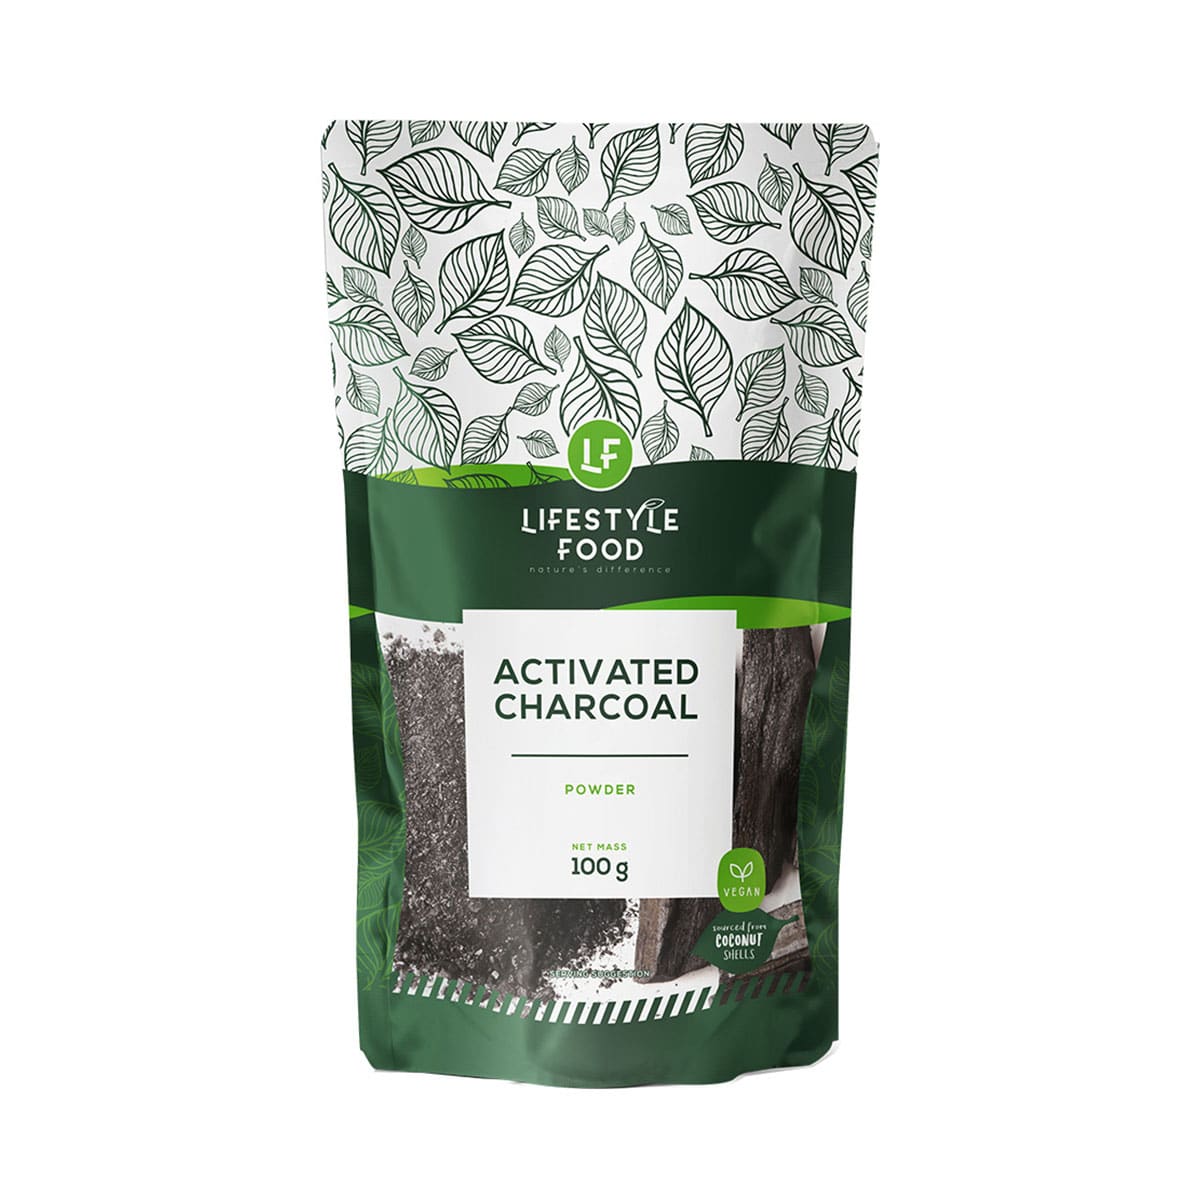 Lifestyle Food Activated Charcoal Powder - 100g